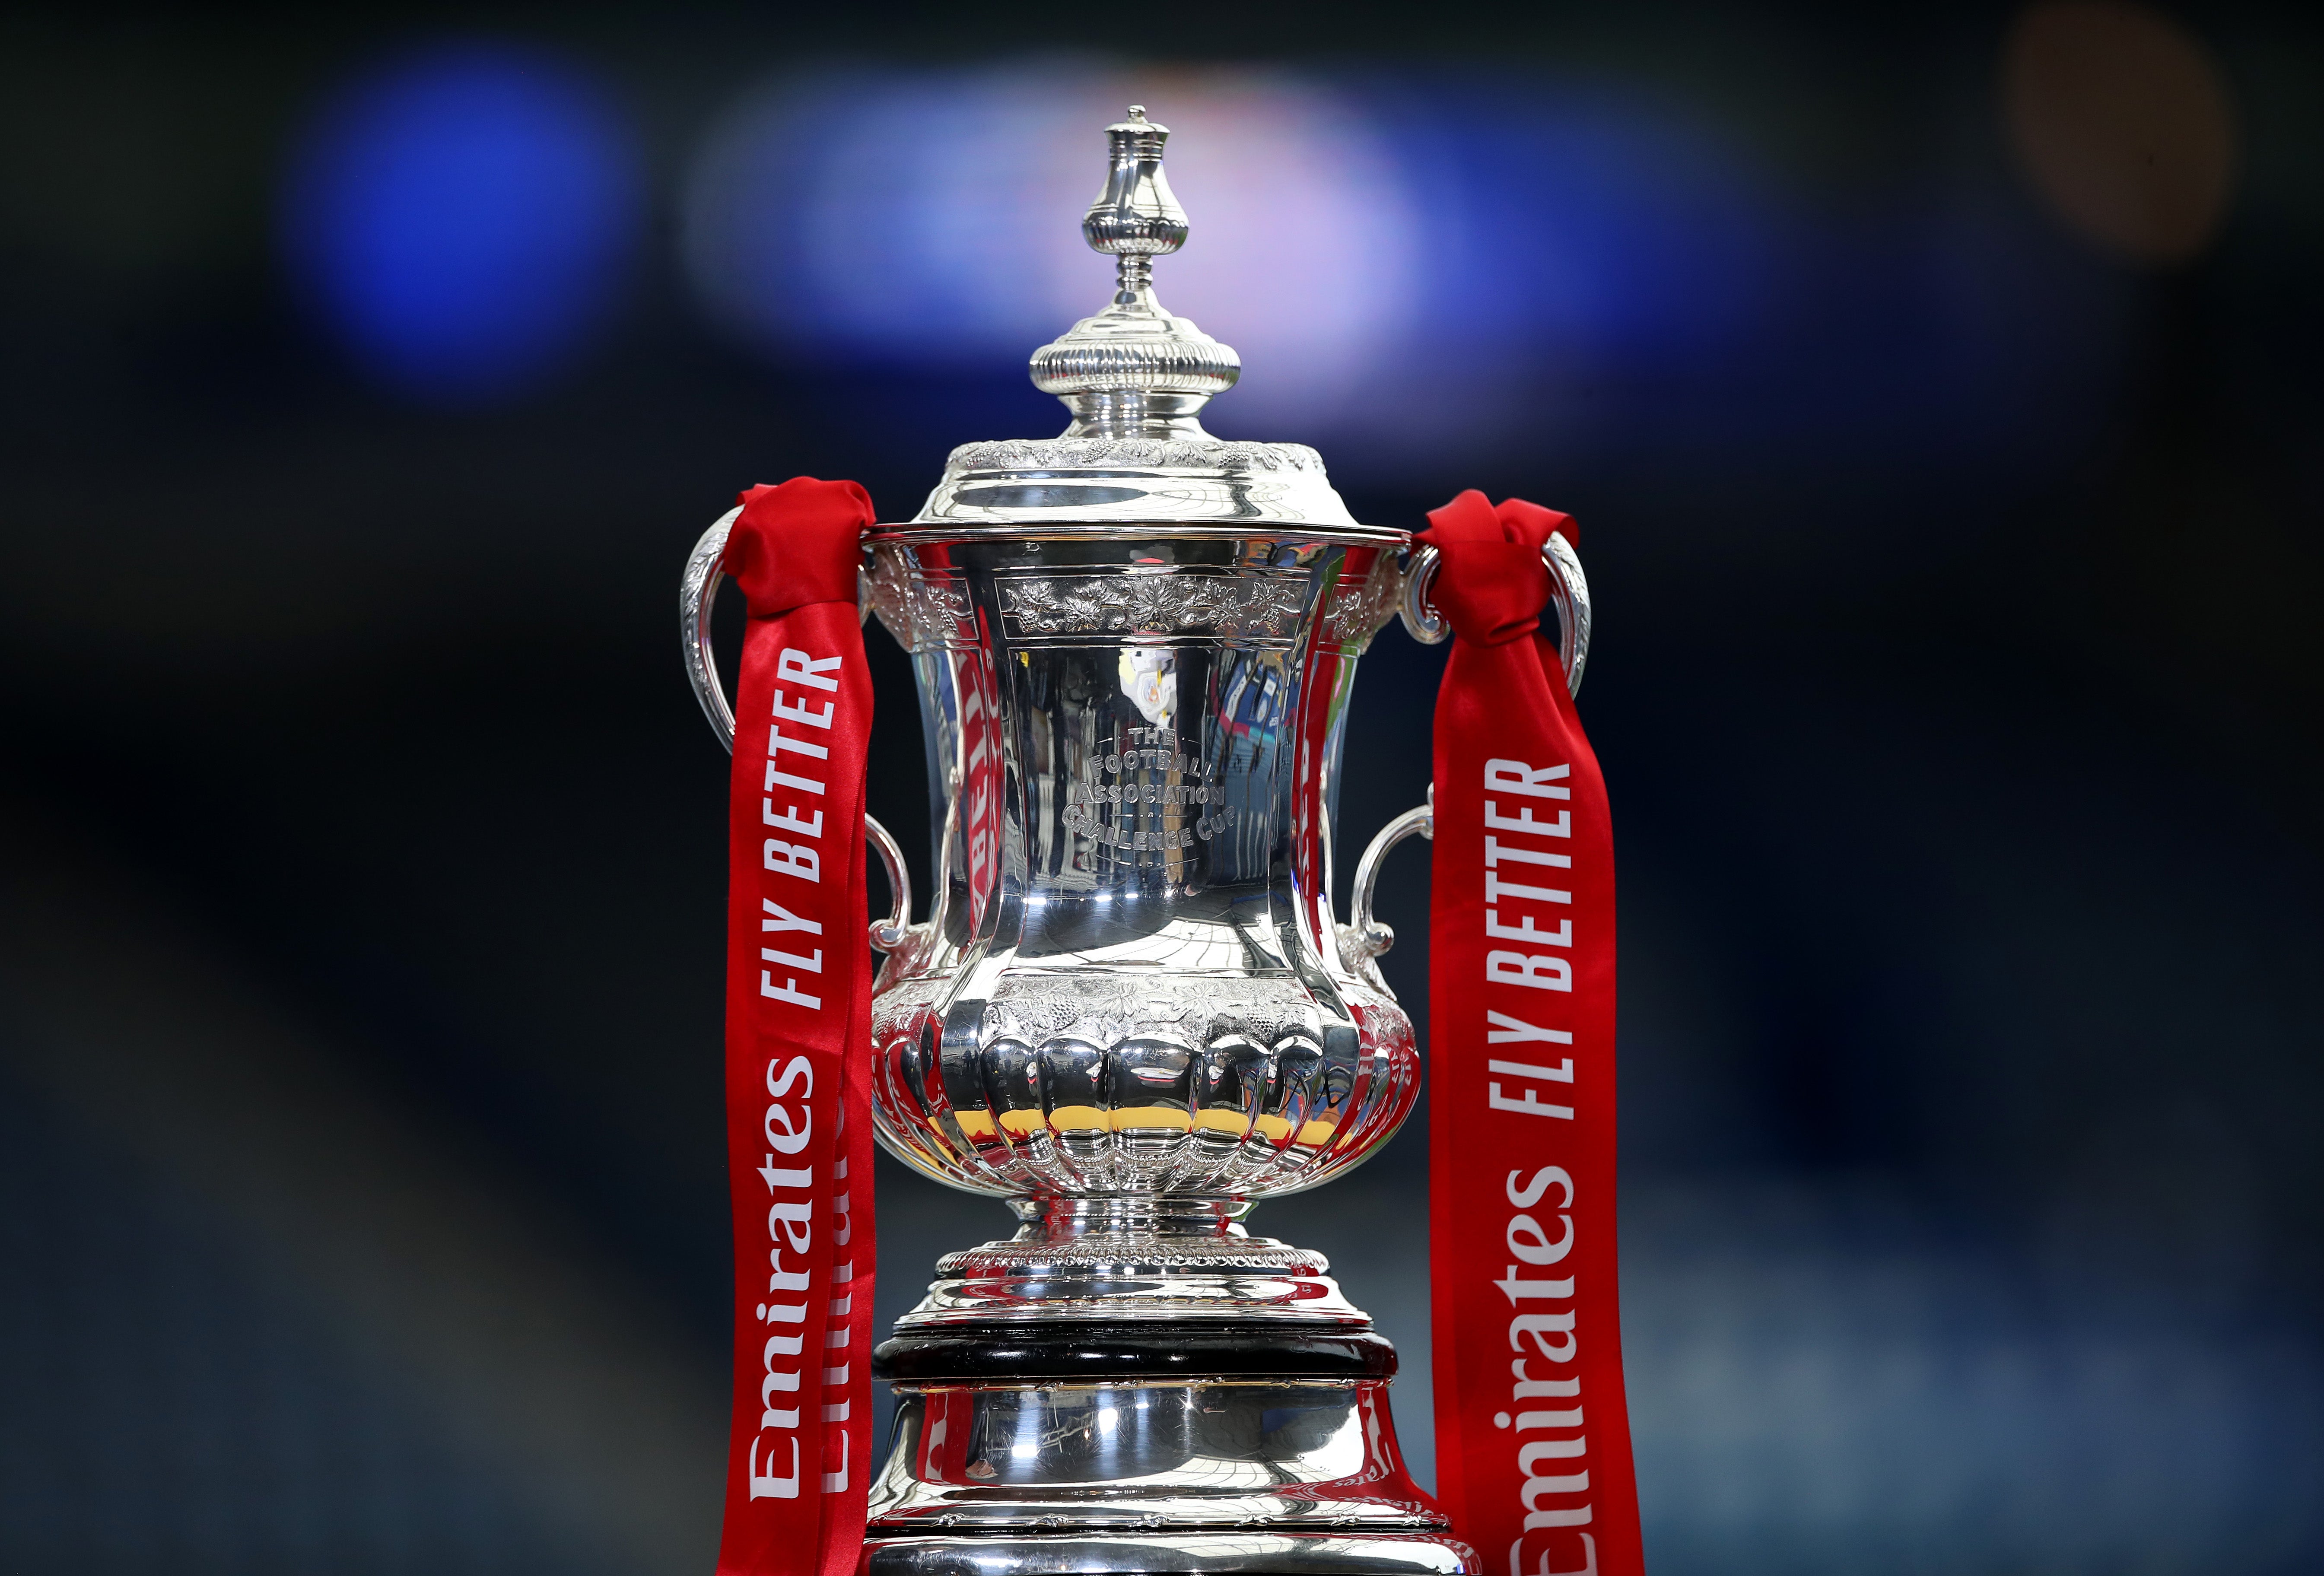 The FA Cup draw will be on Sunday